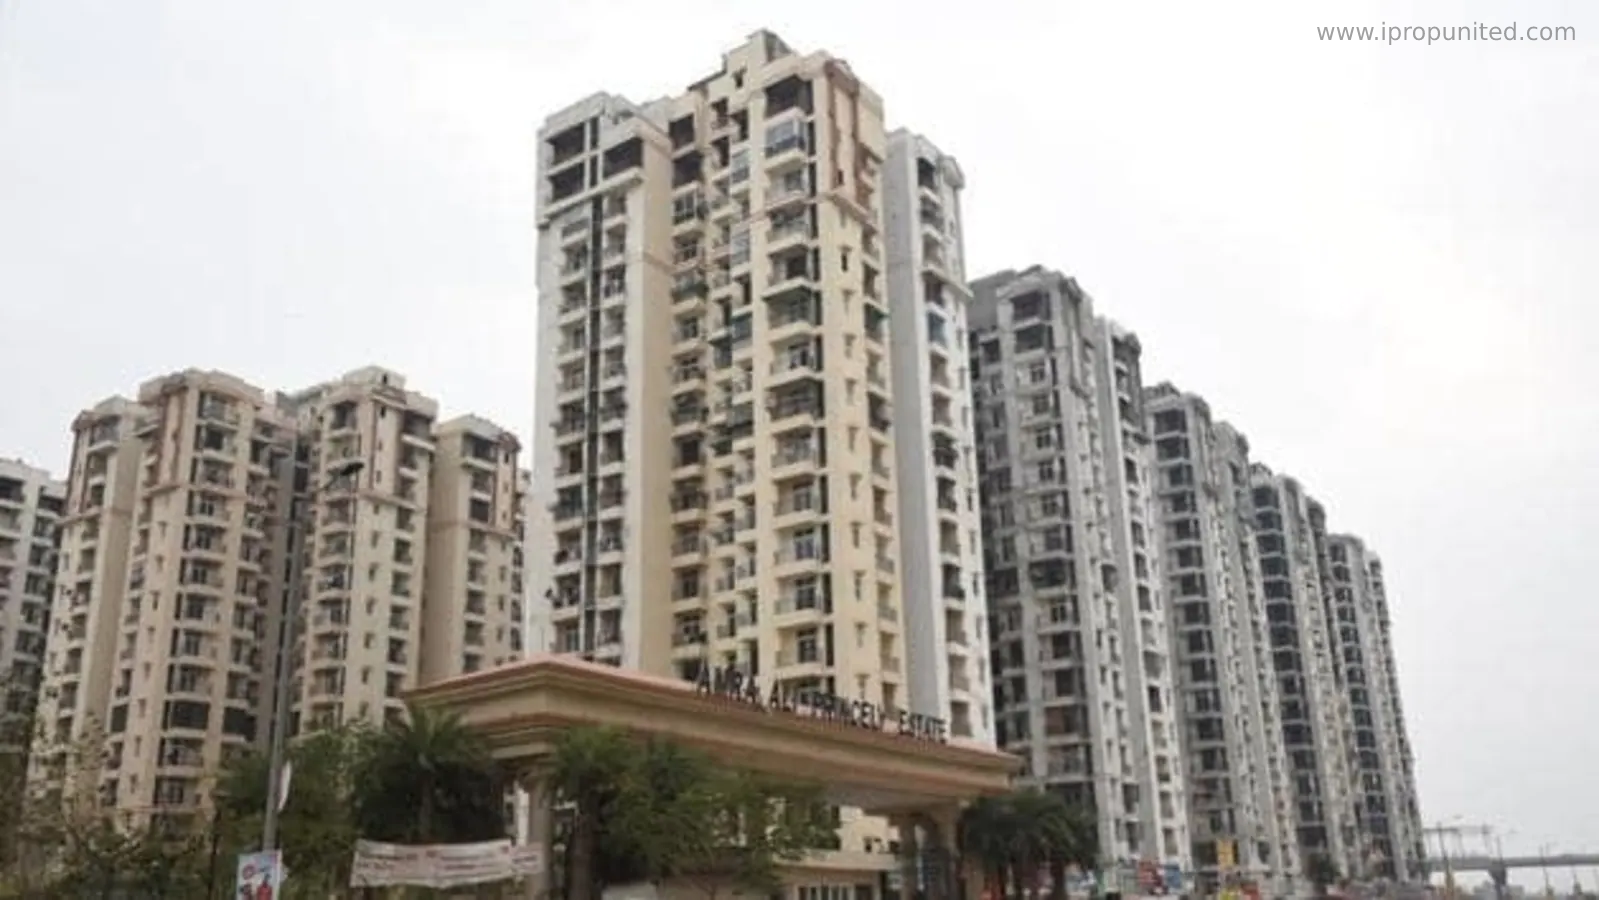 Under the Scheme, Greater Noida authority offers ready flats, applications available from Nov 10